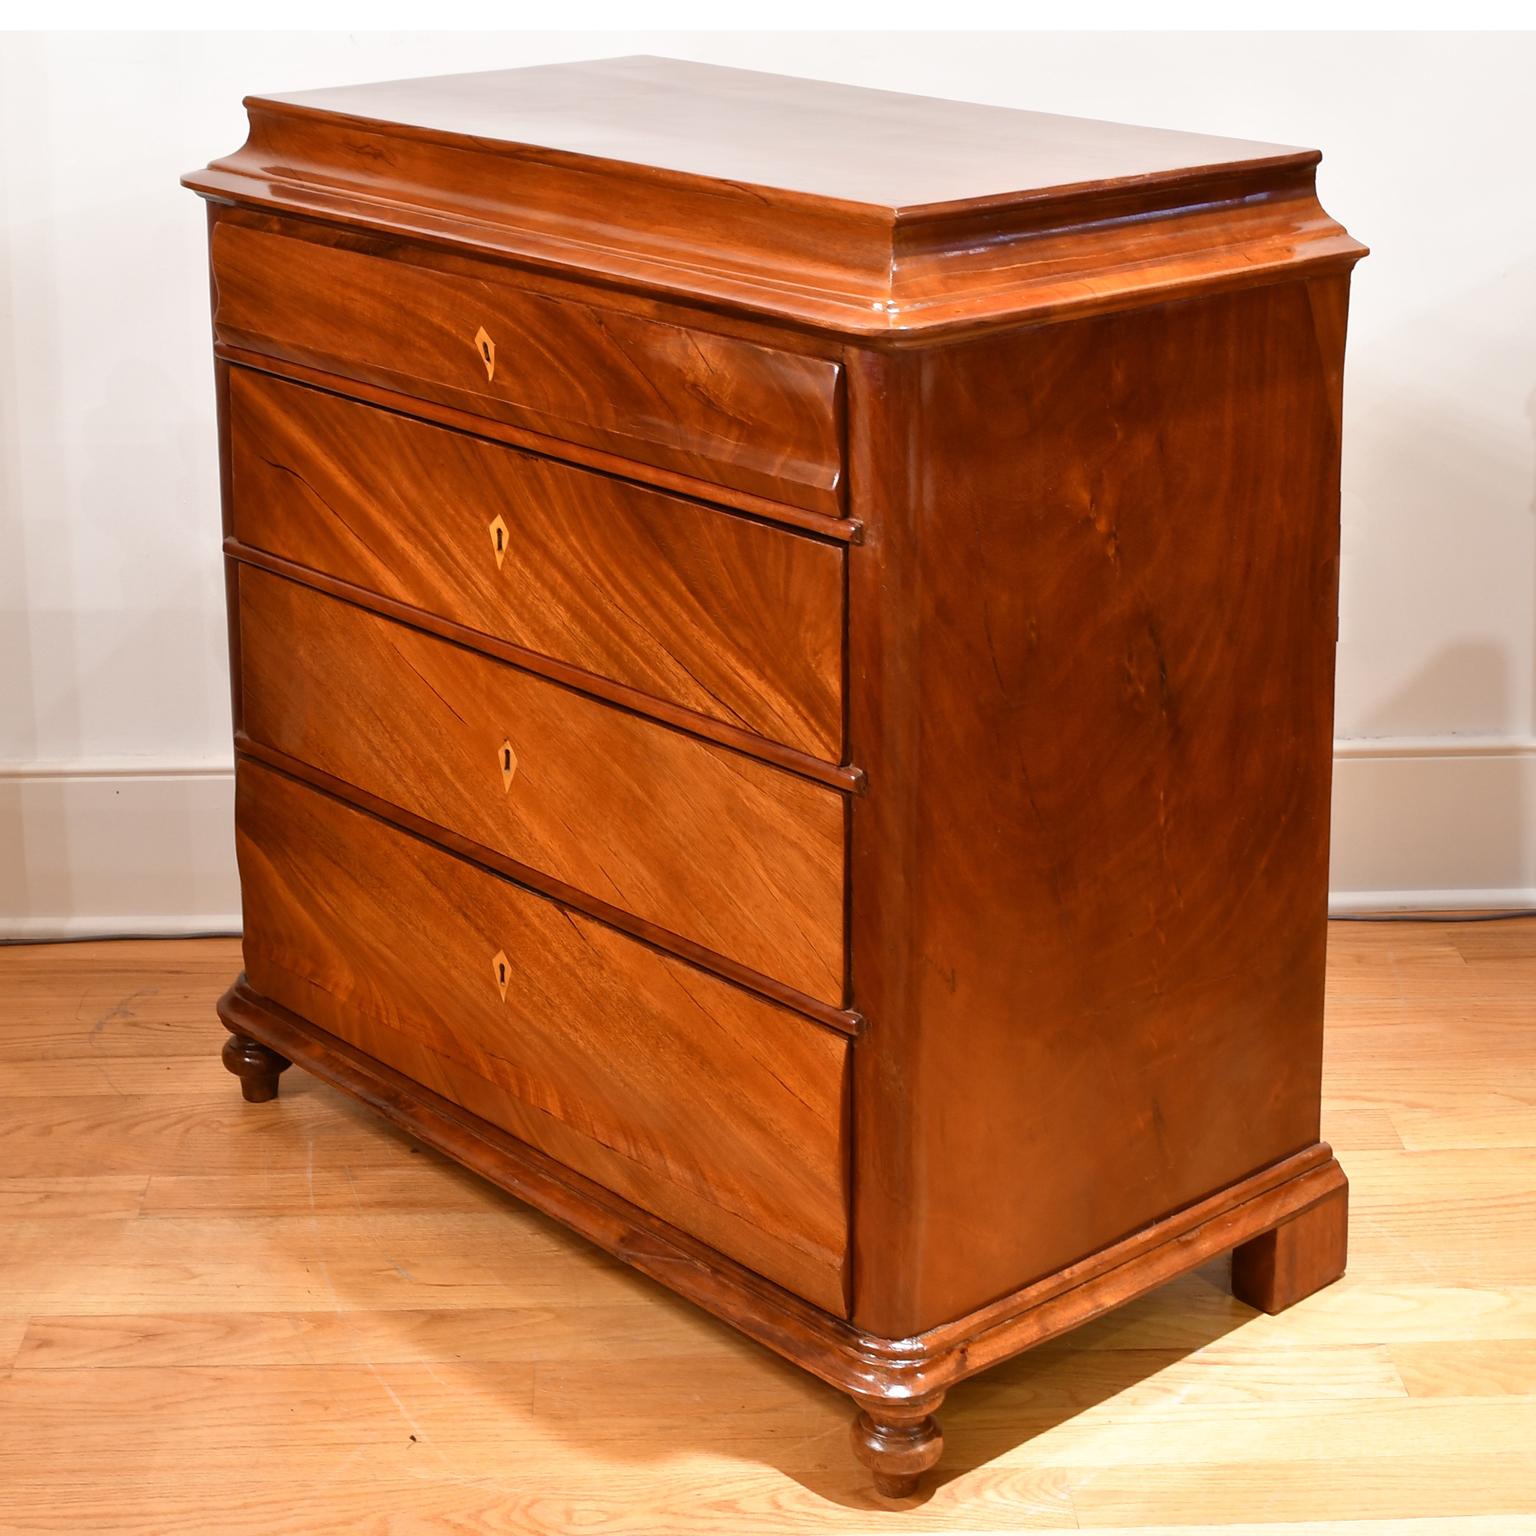 A beautiful Danish Empire or Biedermeier chest in fine West Indies mahogany with four drawers of staggered heights. The handsome figuring of the grain is given added movement by the flat cut contiguous veneer moving horizontally across the front of